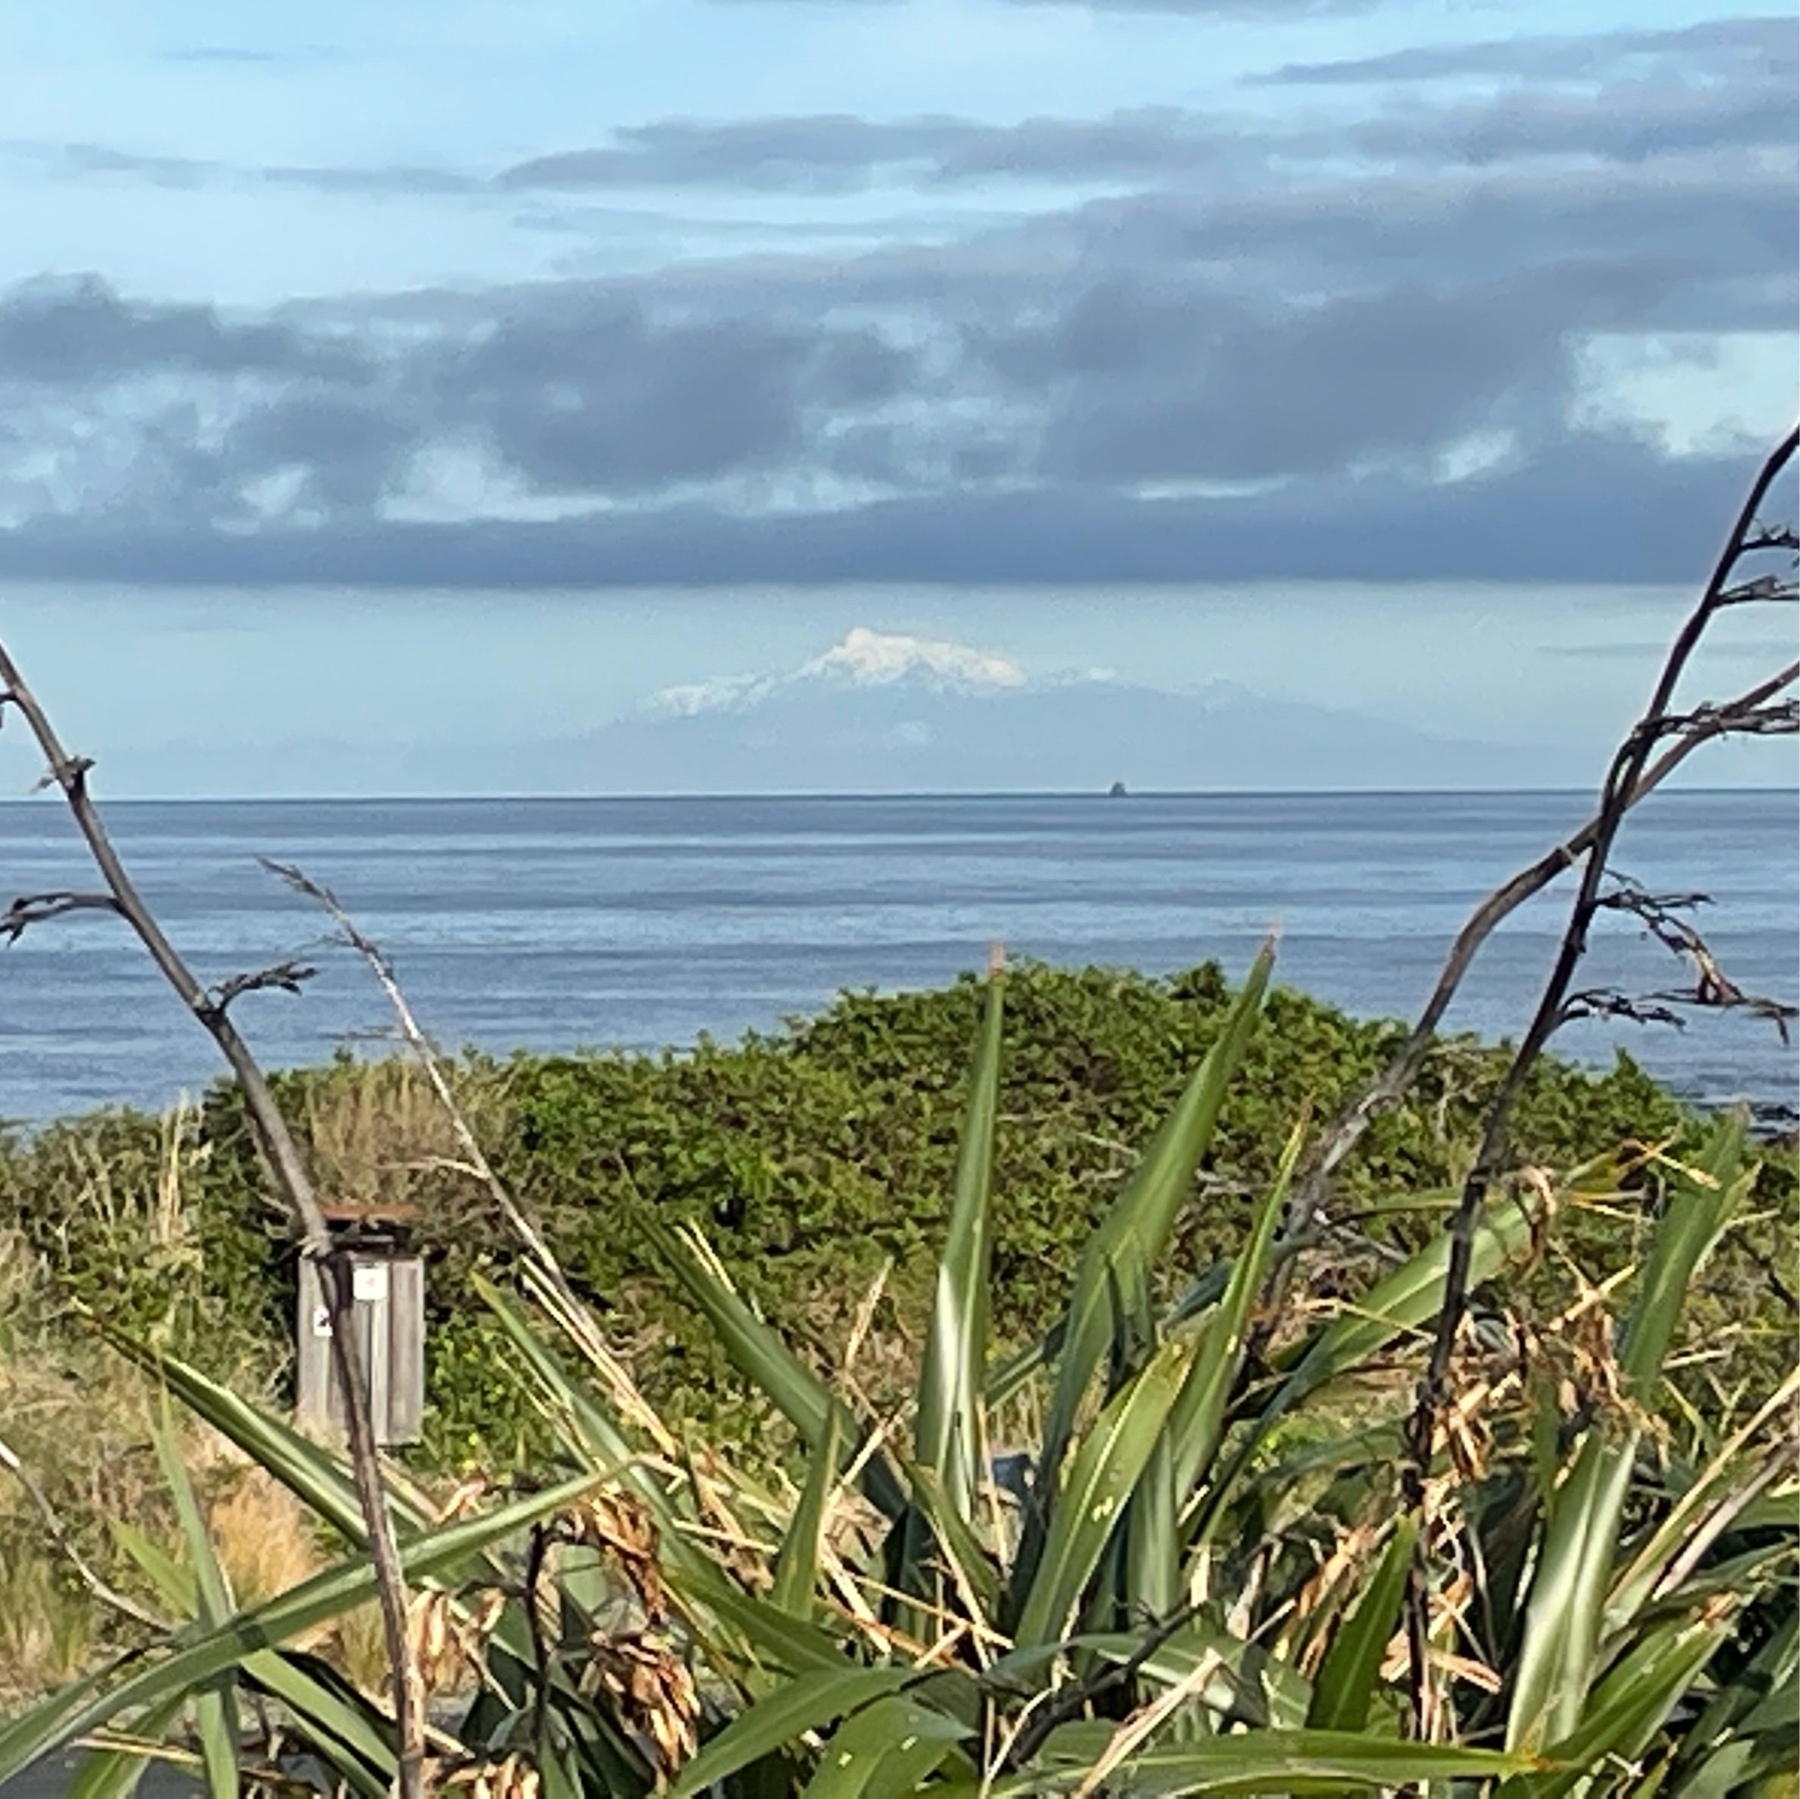 Mount Tapuaenuku, capped with snow, in the Kaikoura ranges of the South Island, as seen from the south coast of Wellington in the North Island today. 